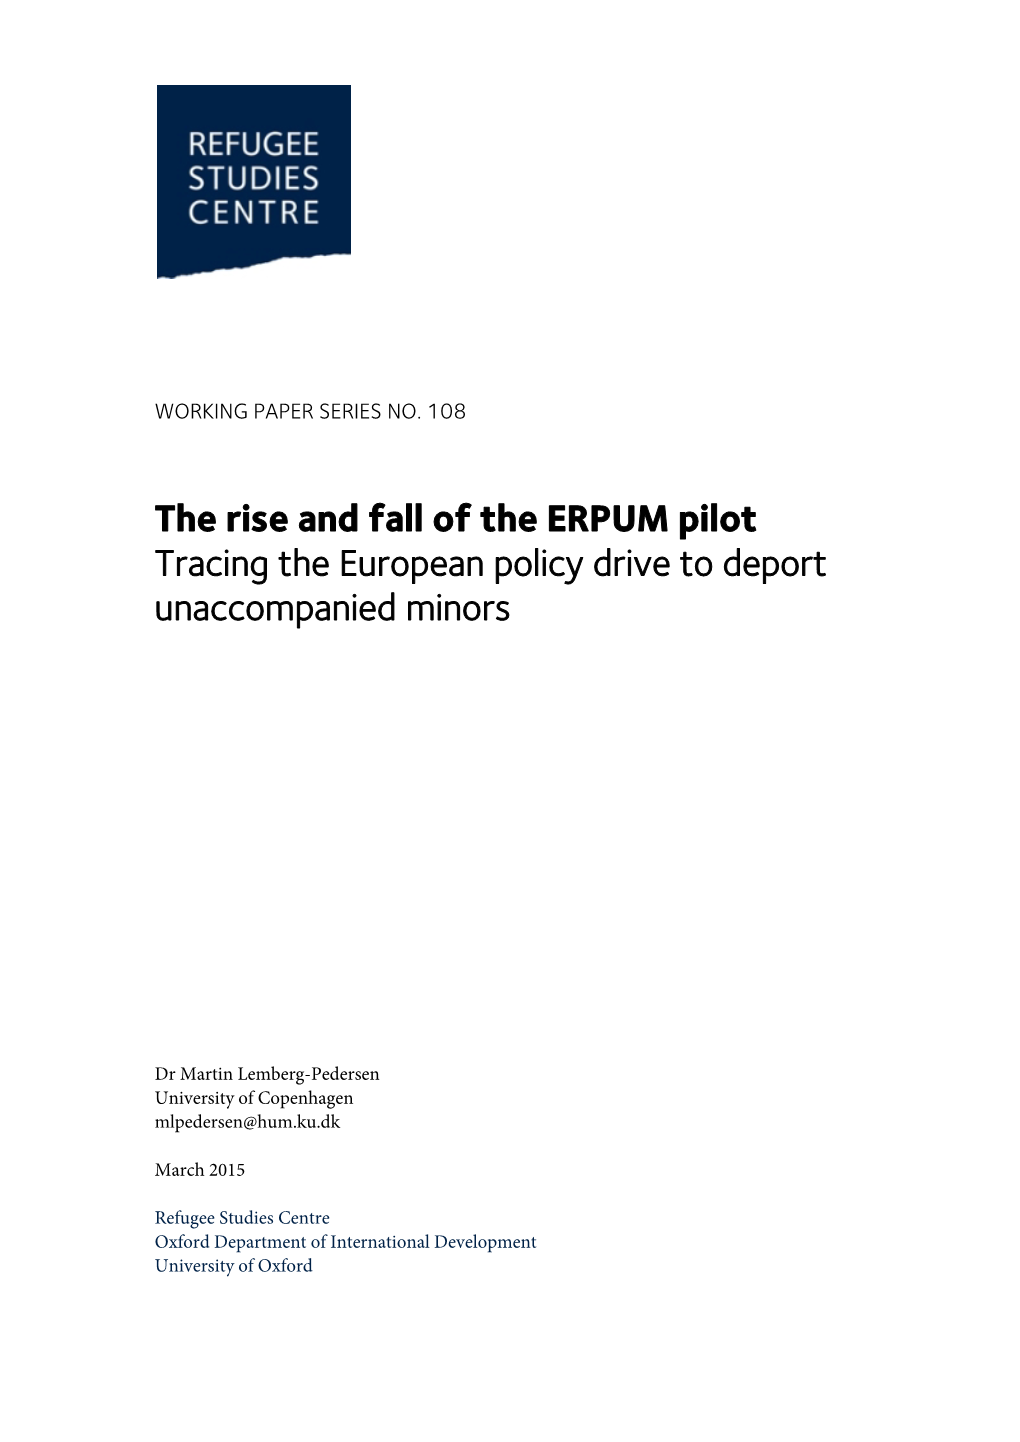 The Rise and Fall of the ERPUM Pilot Tracing the European Policy Drive to Deport Unaccompanied Minors